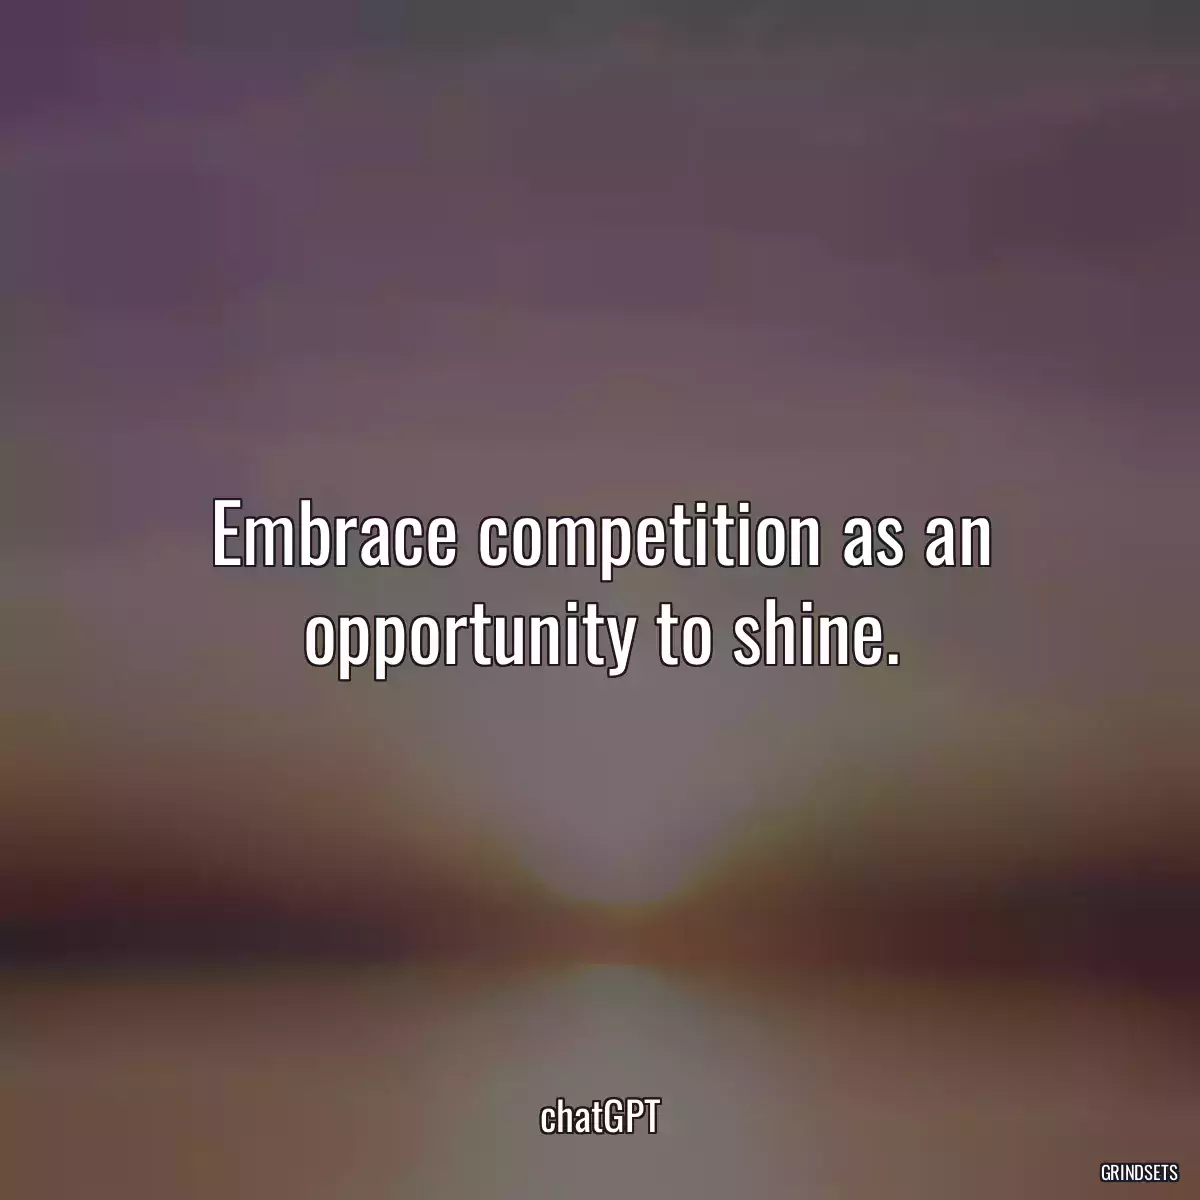 Embrace competition as an opportunity to shine.